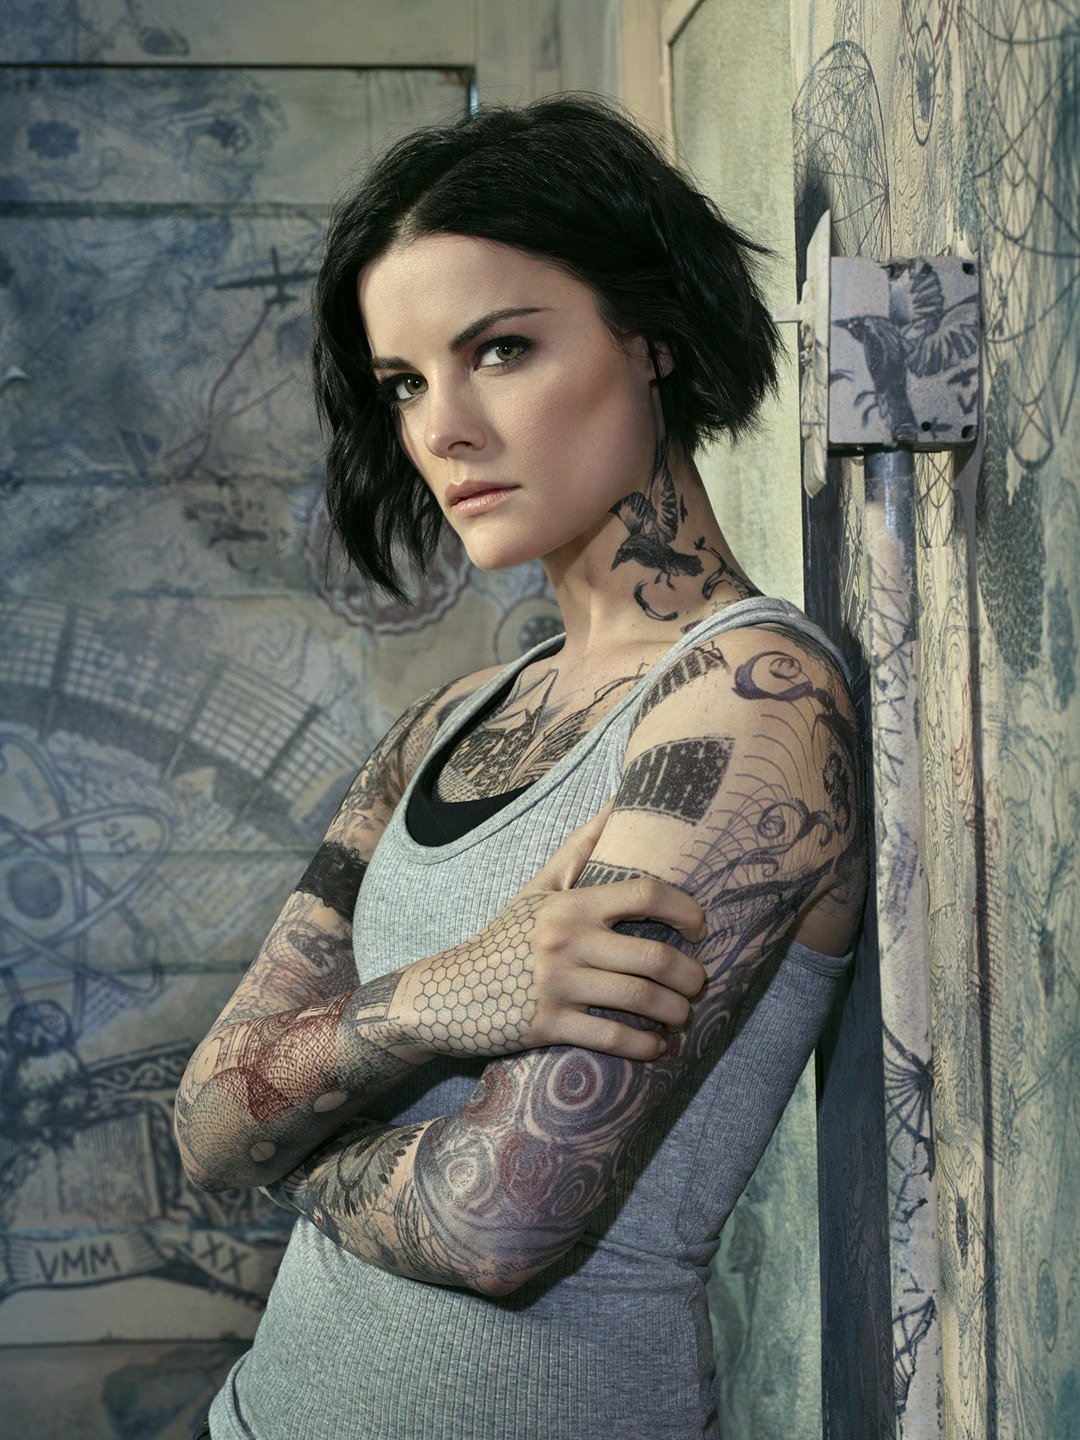 Details 93+ about girl with tattoos tv series super cool -  .vn